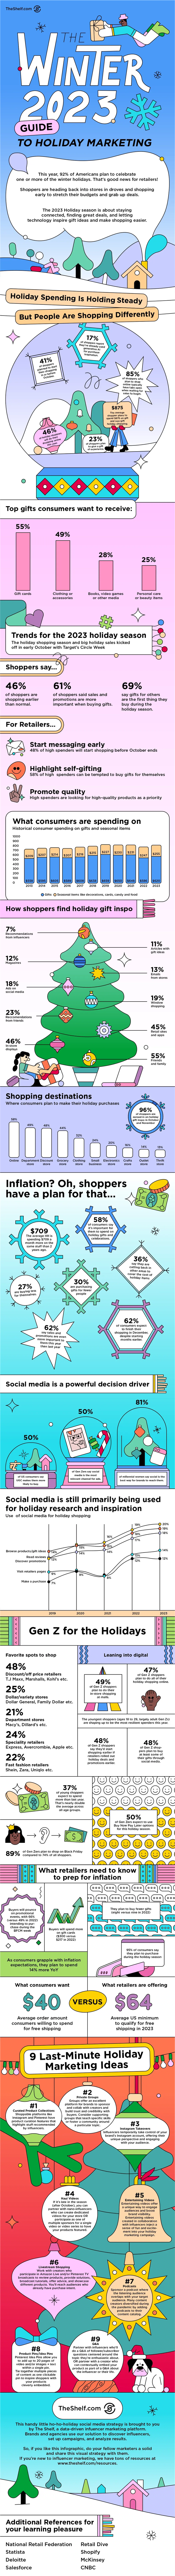 Holiday Marketing Infographic: The Step-by-Step Guide to Holiday Marketing